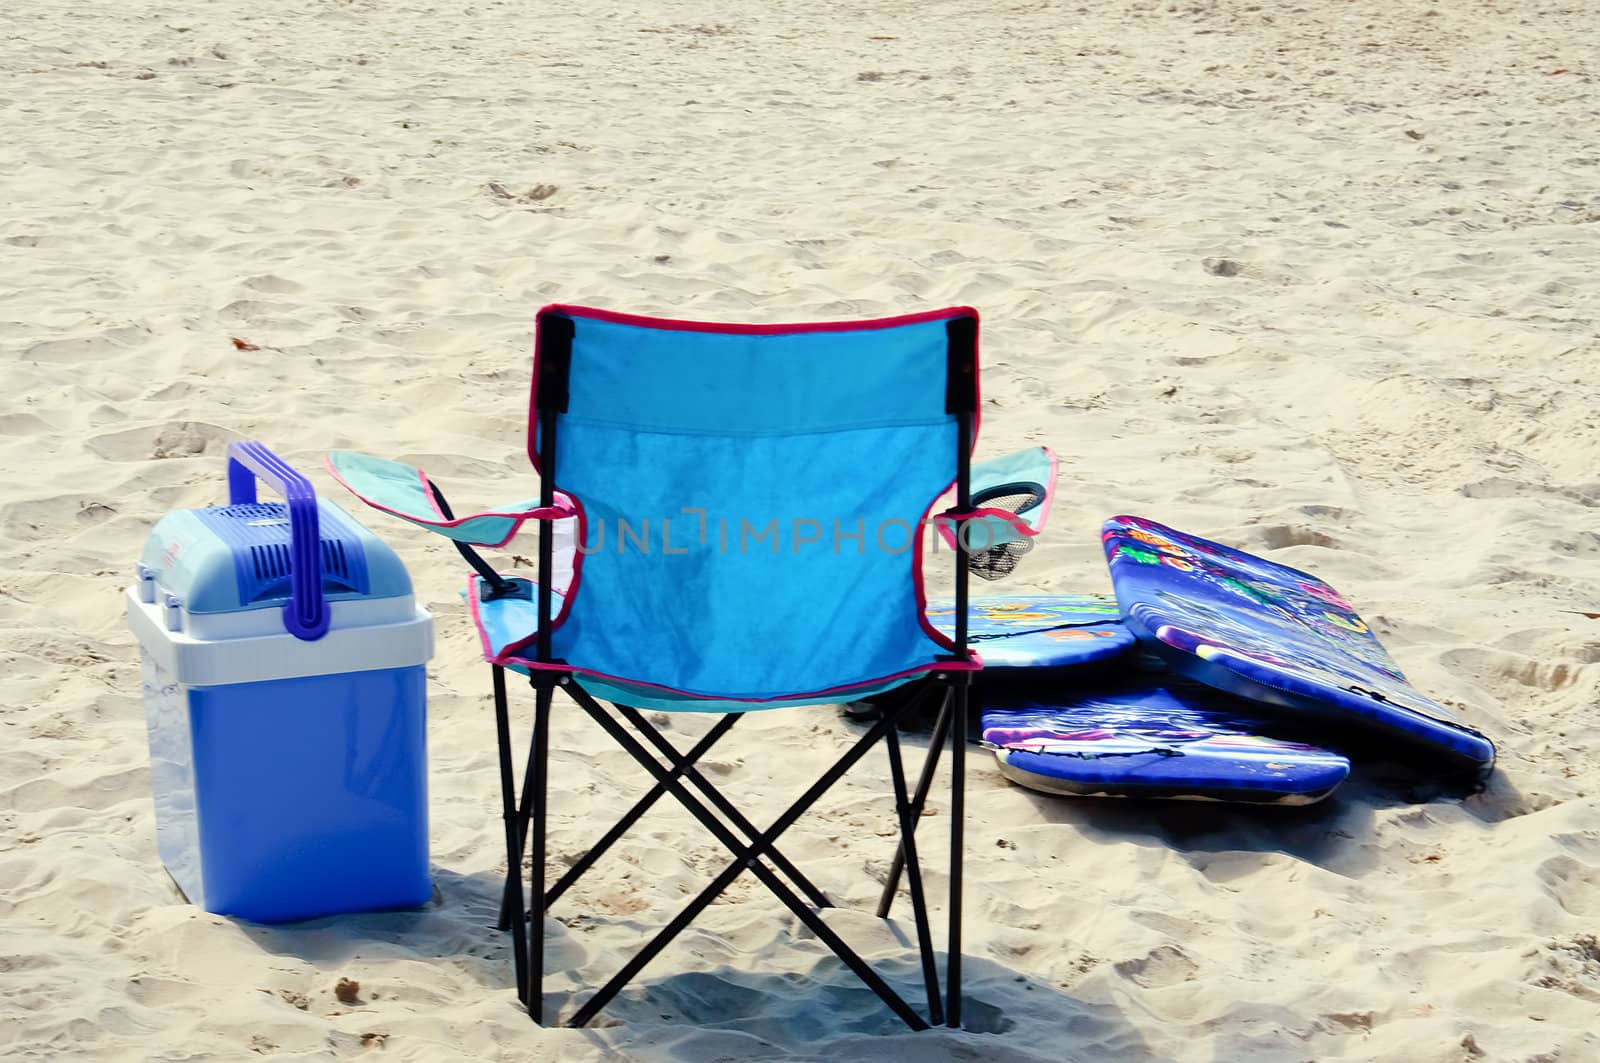 A blue nylon chair, cooler, and surf boards on a sandy beach